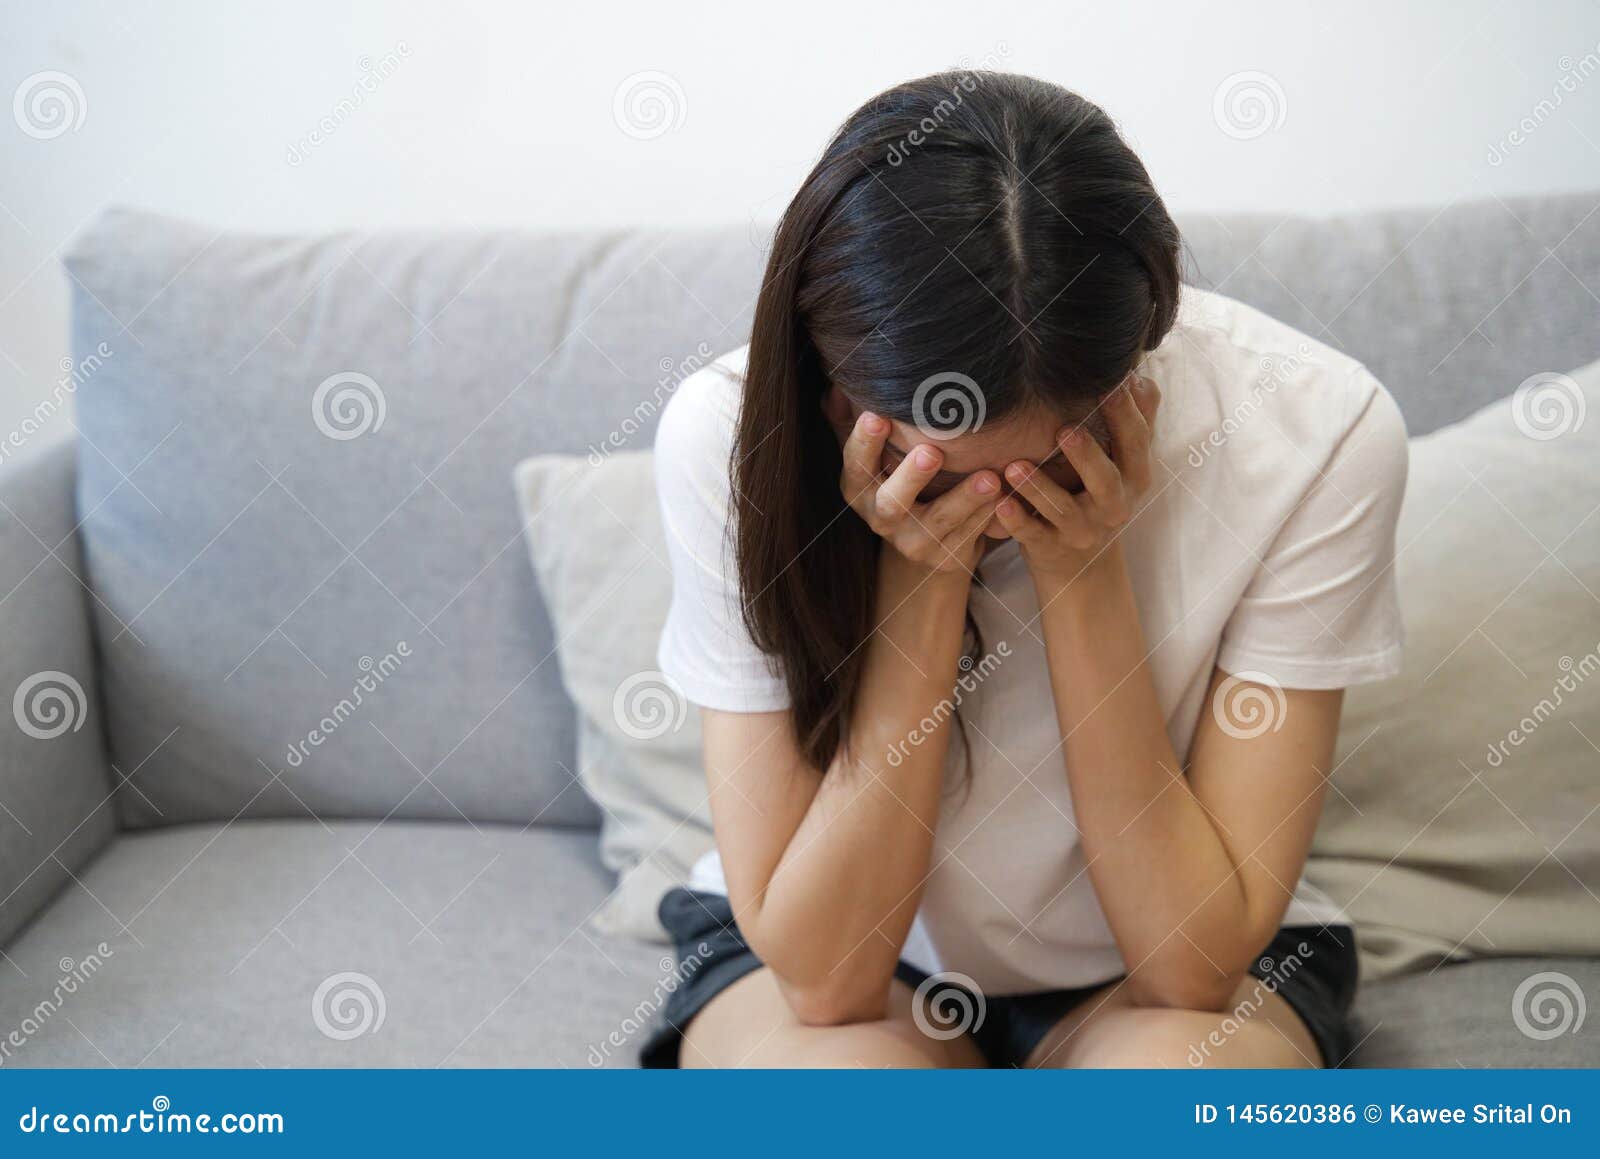 hands on temples of young disappointed  sadness asian girl sitting on sofa. she is feeling not very good due to her sickness and